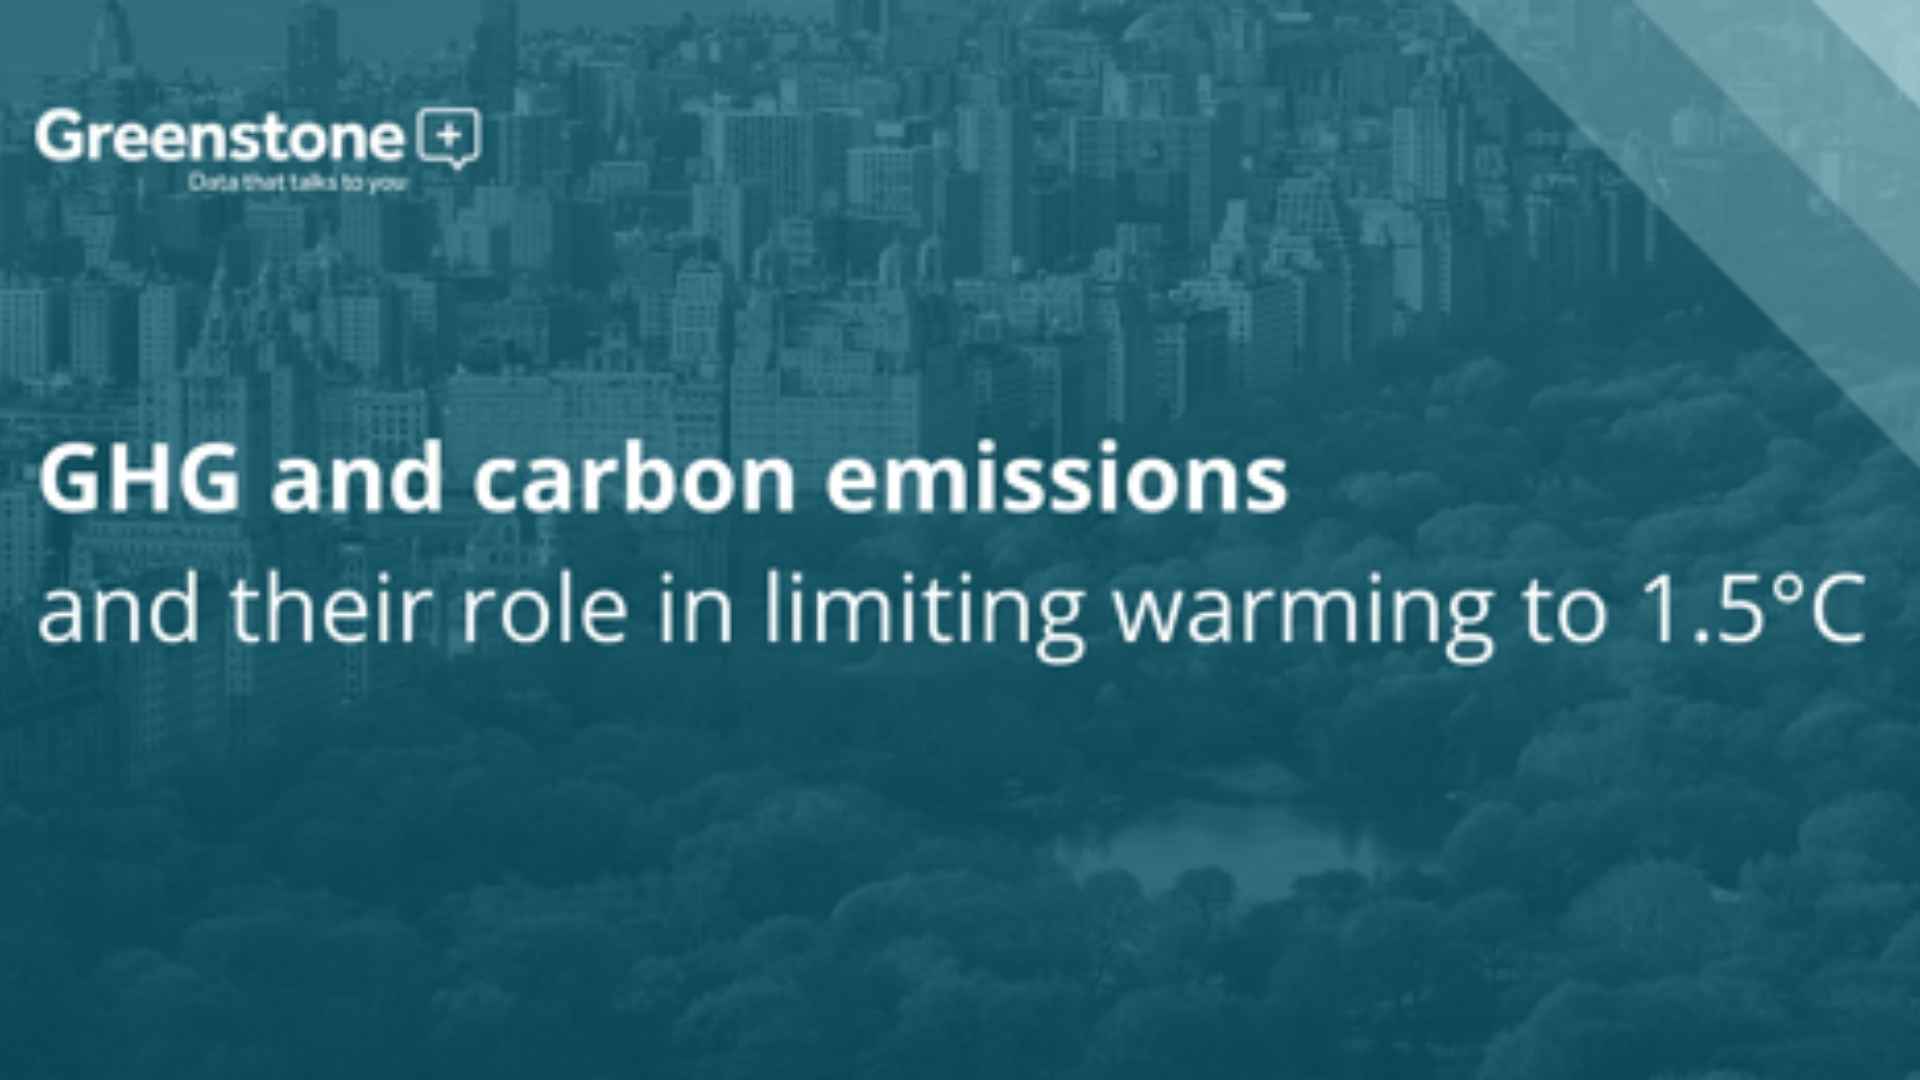 GHG and carbon emissions and their role in limiting warming to 1.5°C